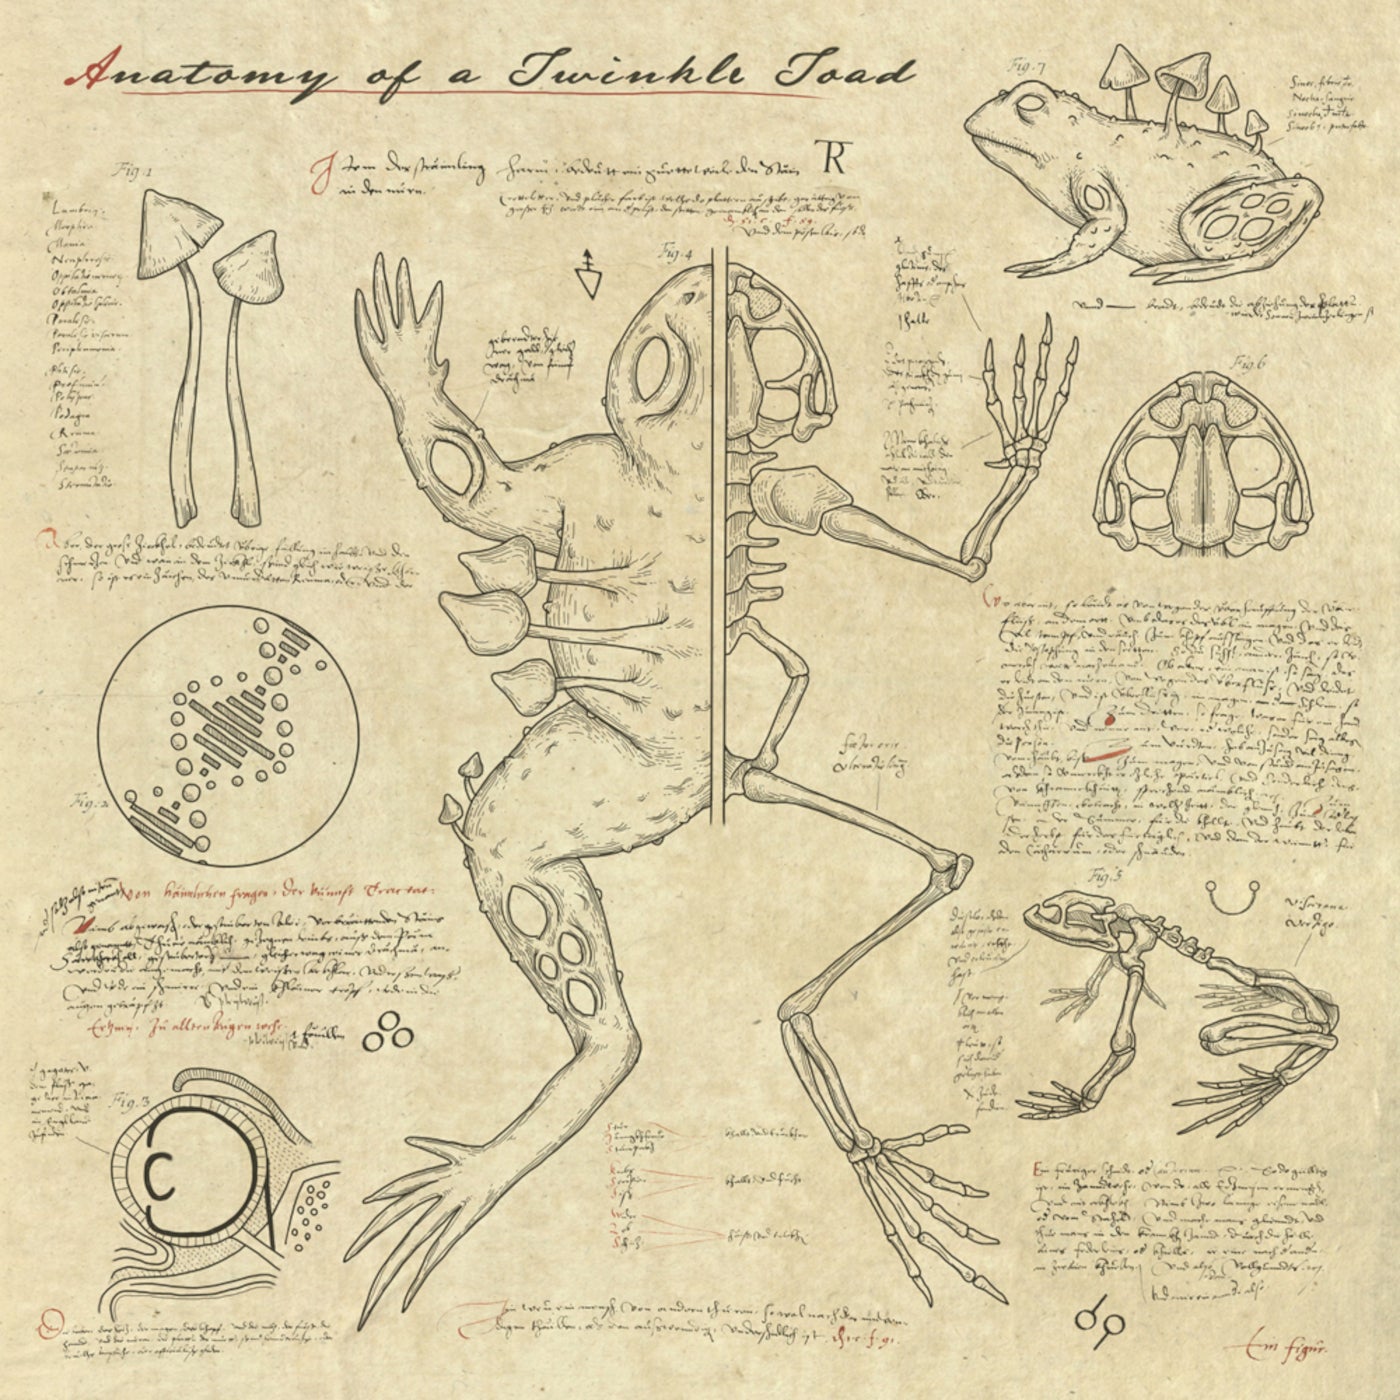 Anatomy of a Twinkle Toad